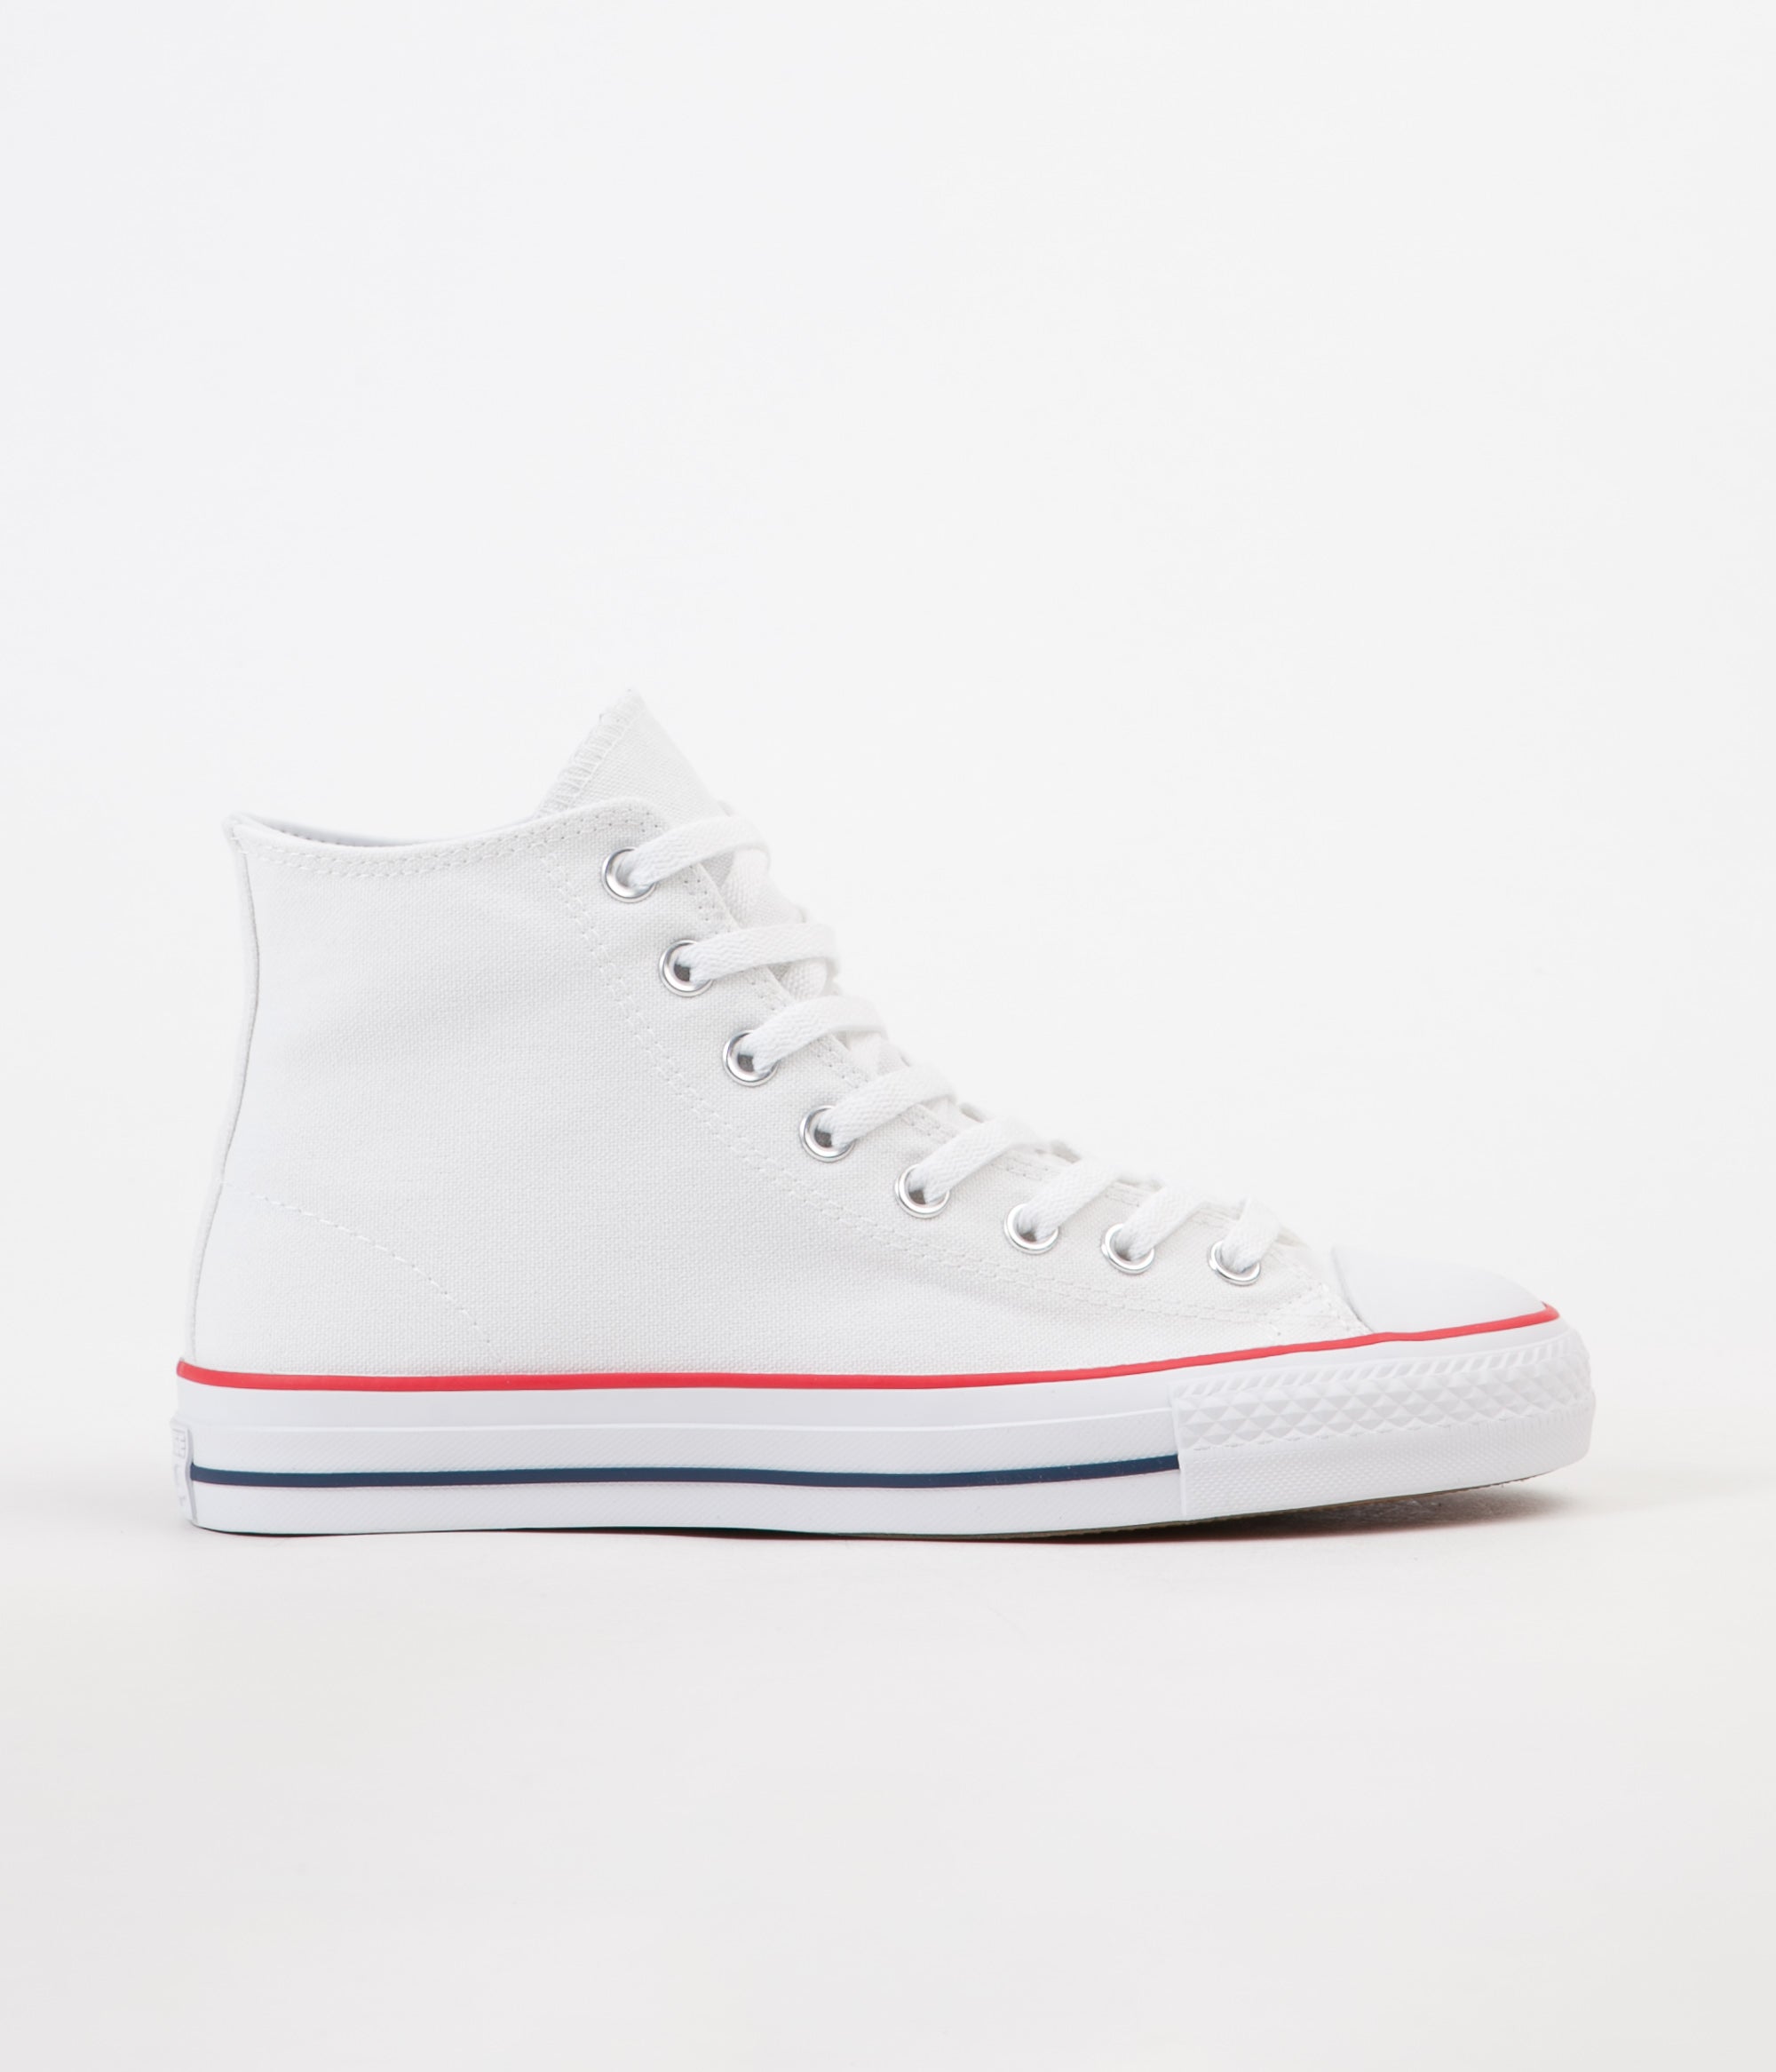 converse shipping to europe